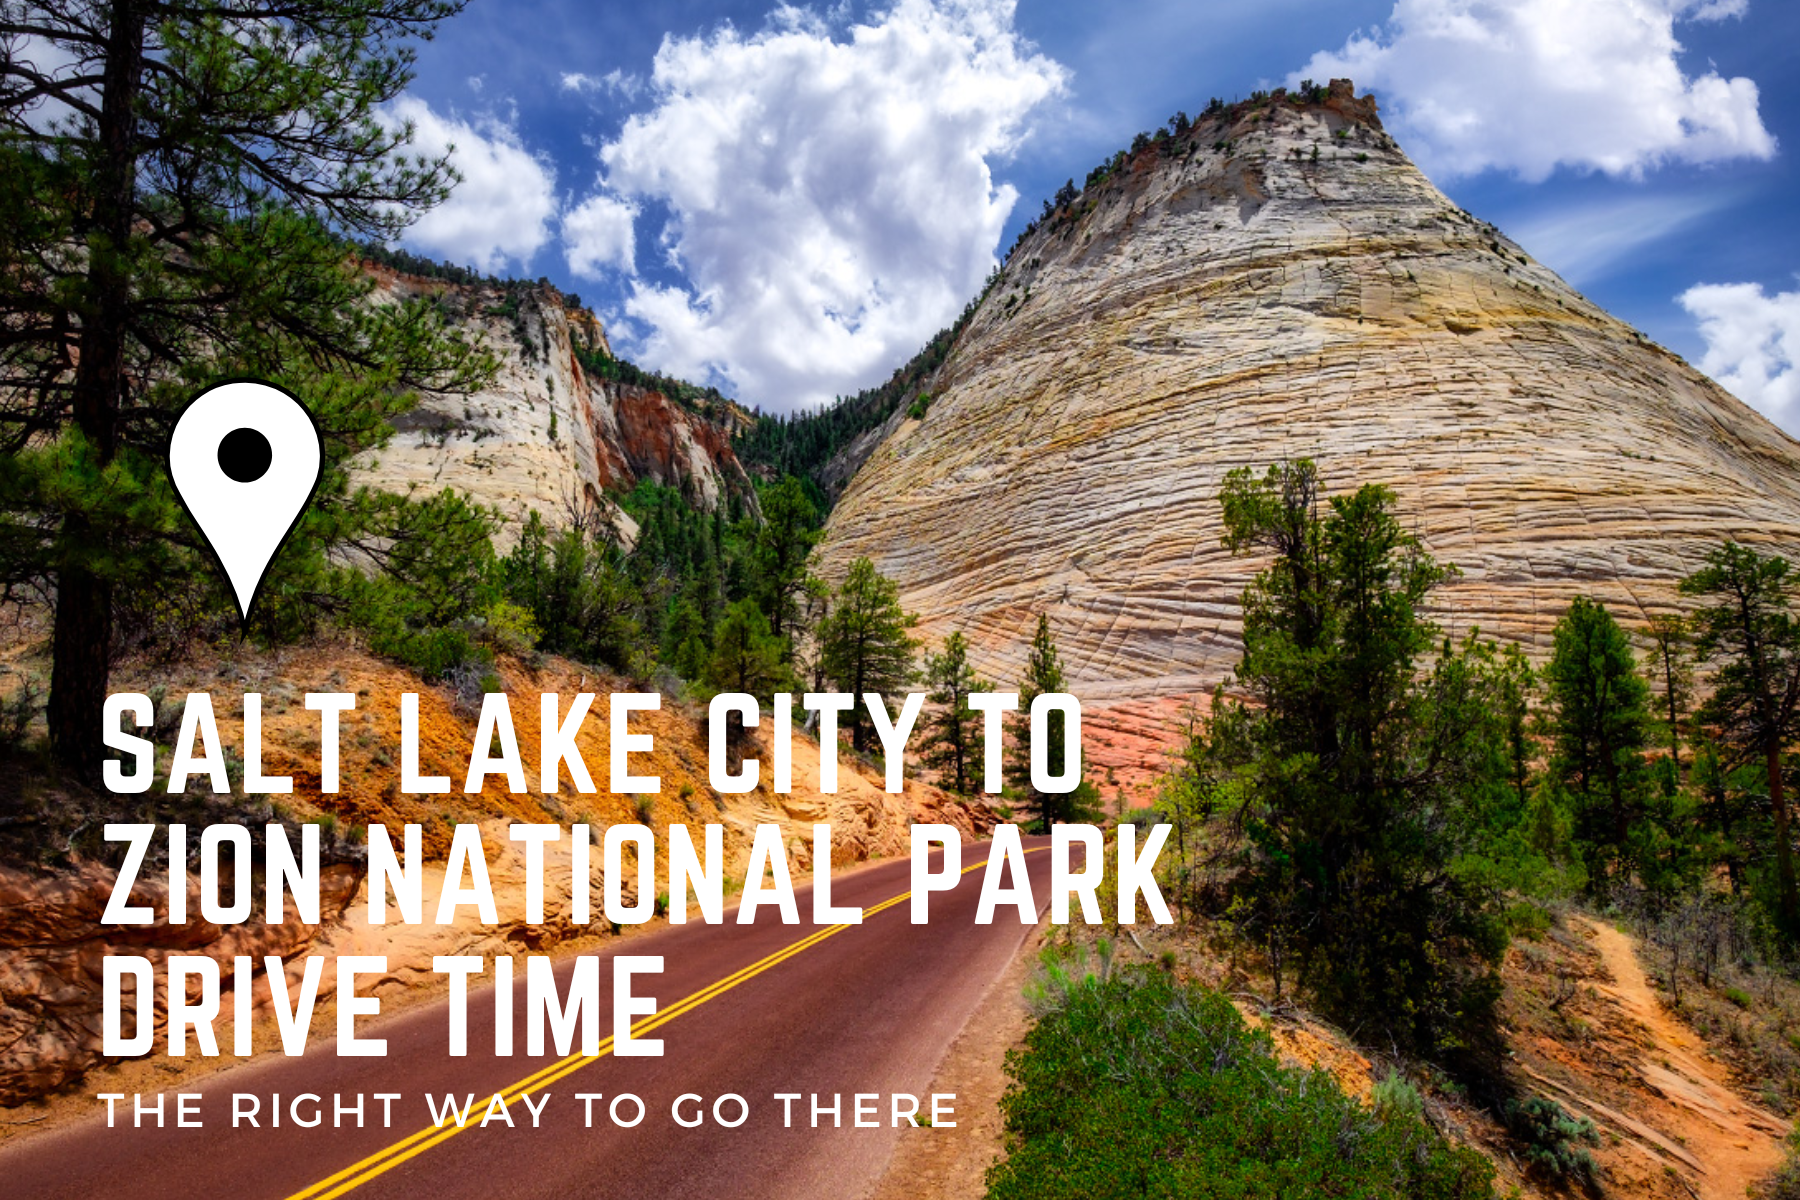 Salt Lake City To Zion National Park Drive Time - The Right Way To Go There